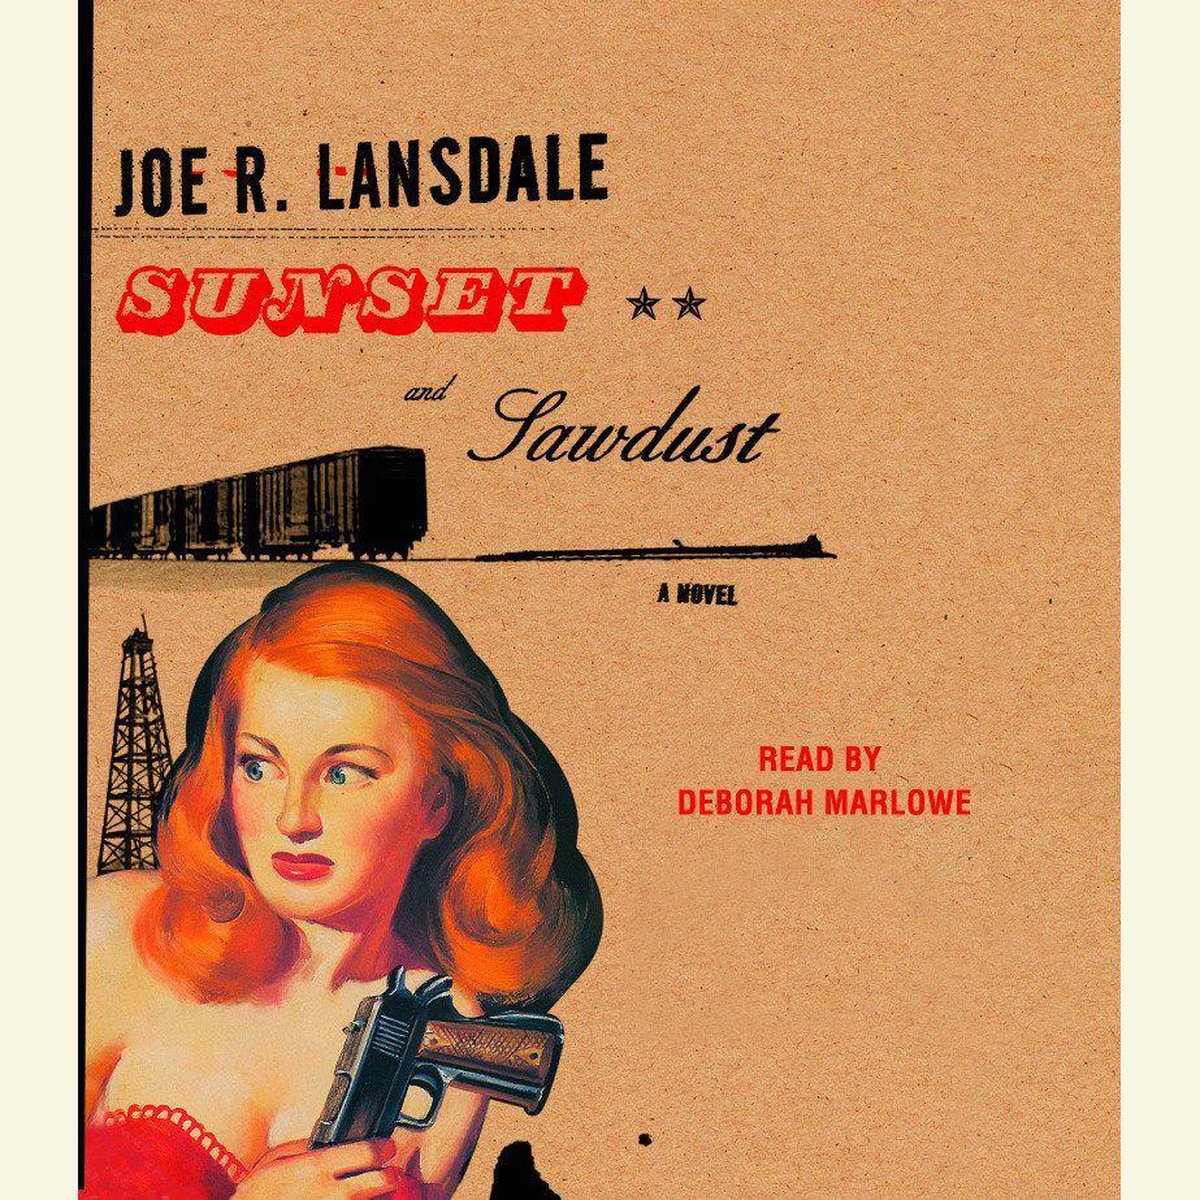 Sunset and Sawdust - Joe R. Lansdale